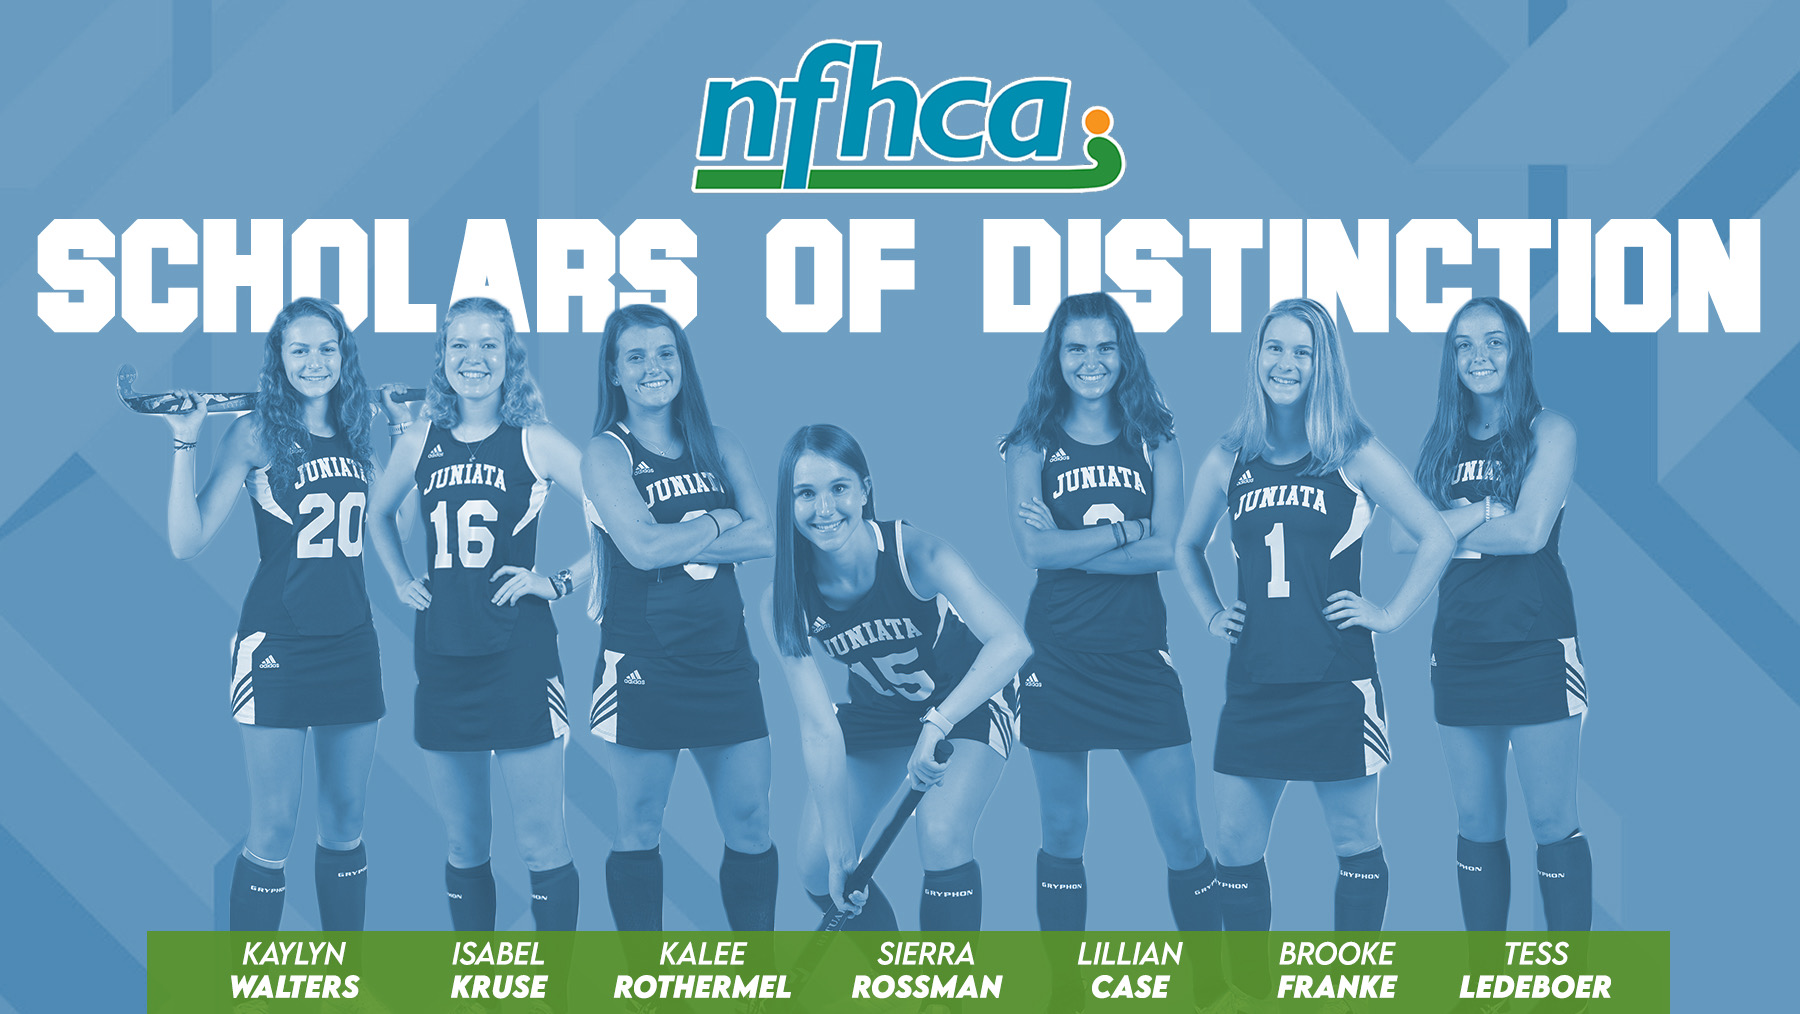 Seven Field Hockey Players Recognized as NFHCA DIII Scholar's of Distinction